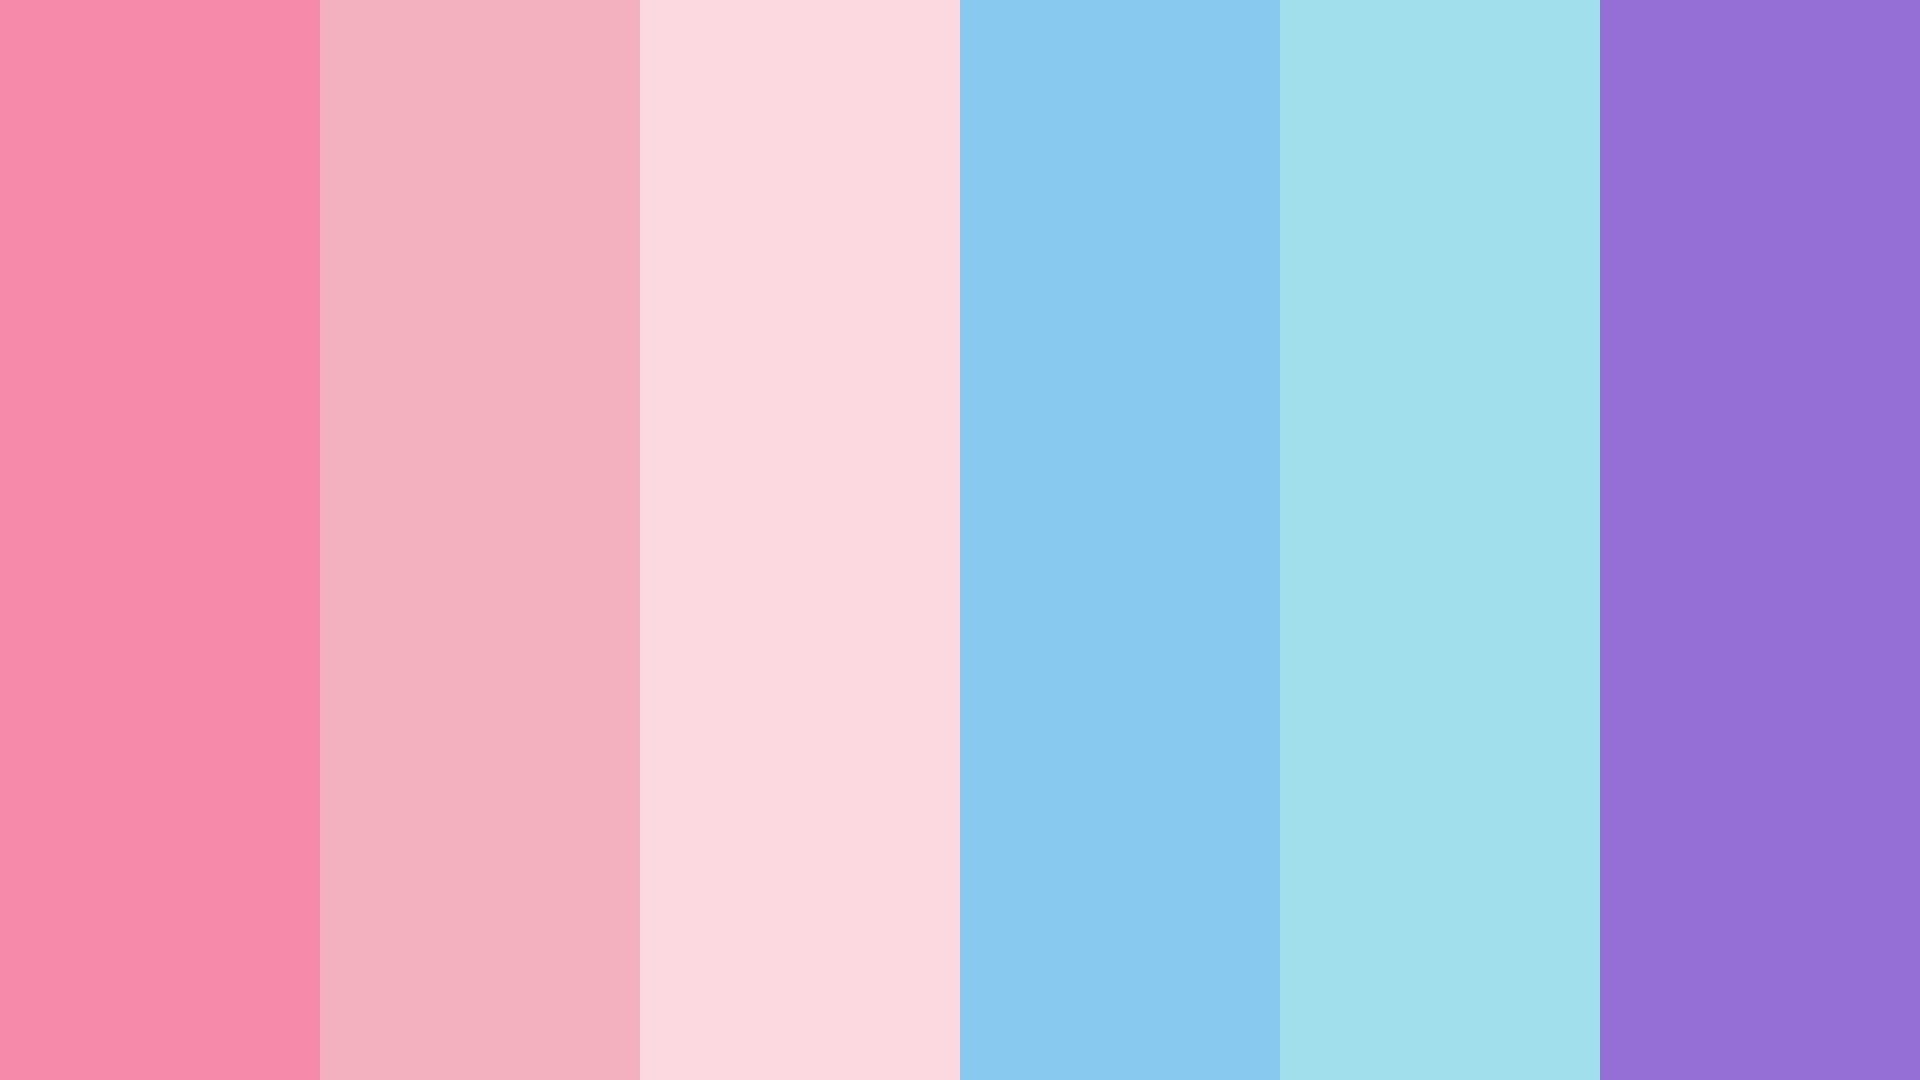 1. "Pastel Hair Inspiration: Pink, Blue, and Purple" on Tumblr - wide 3